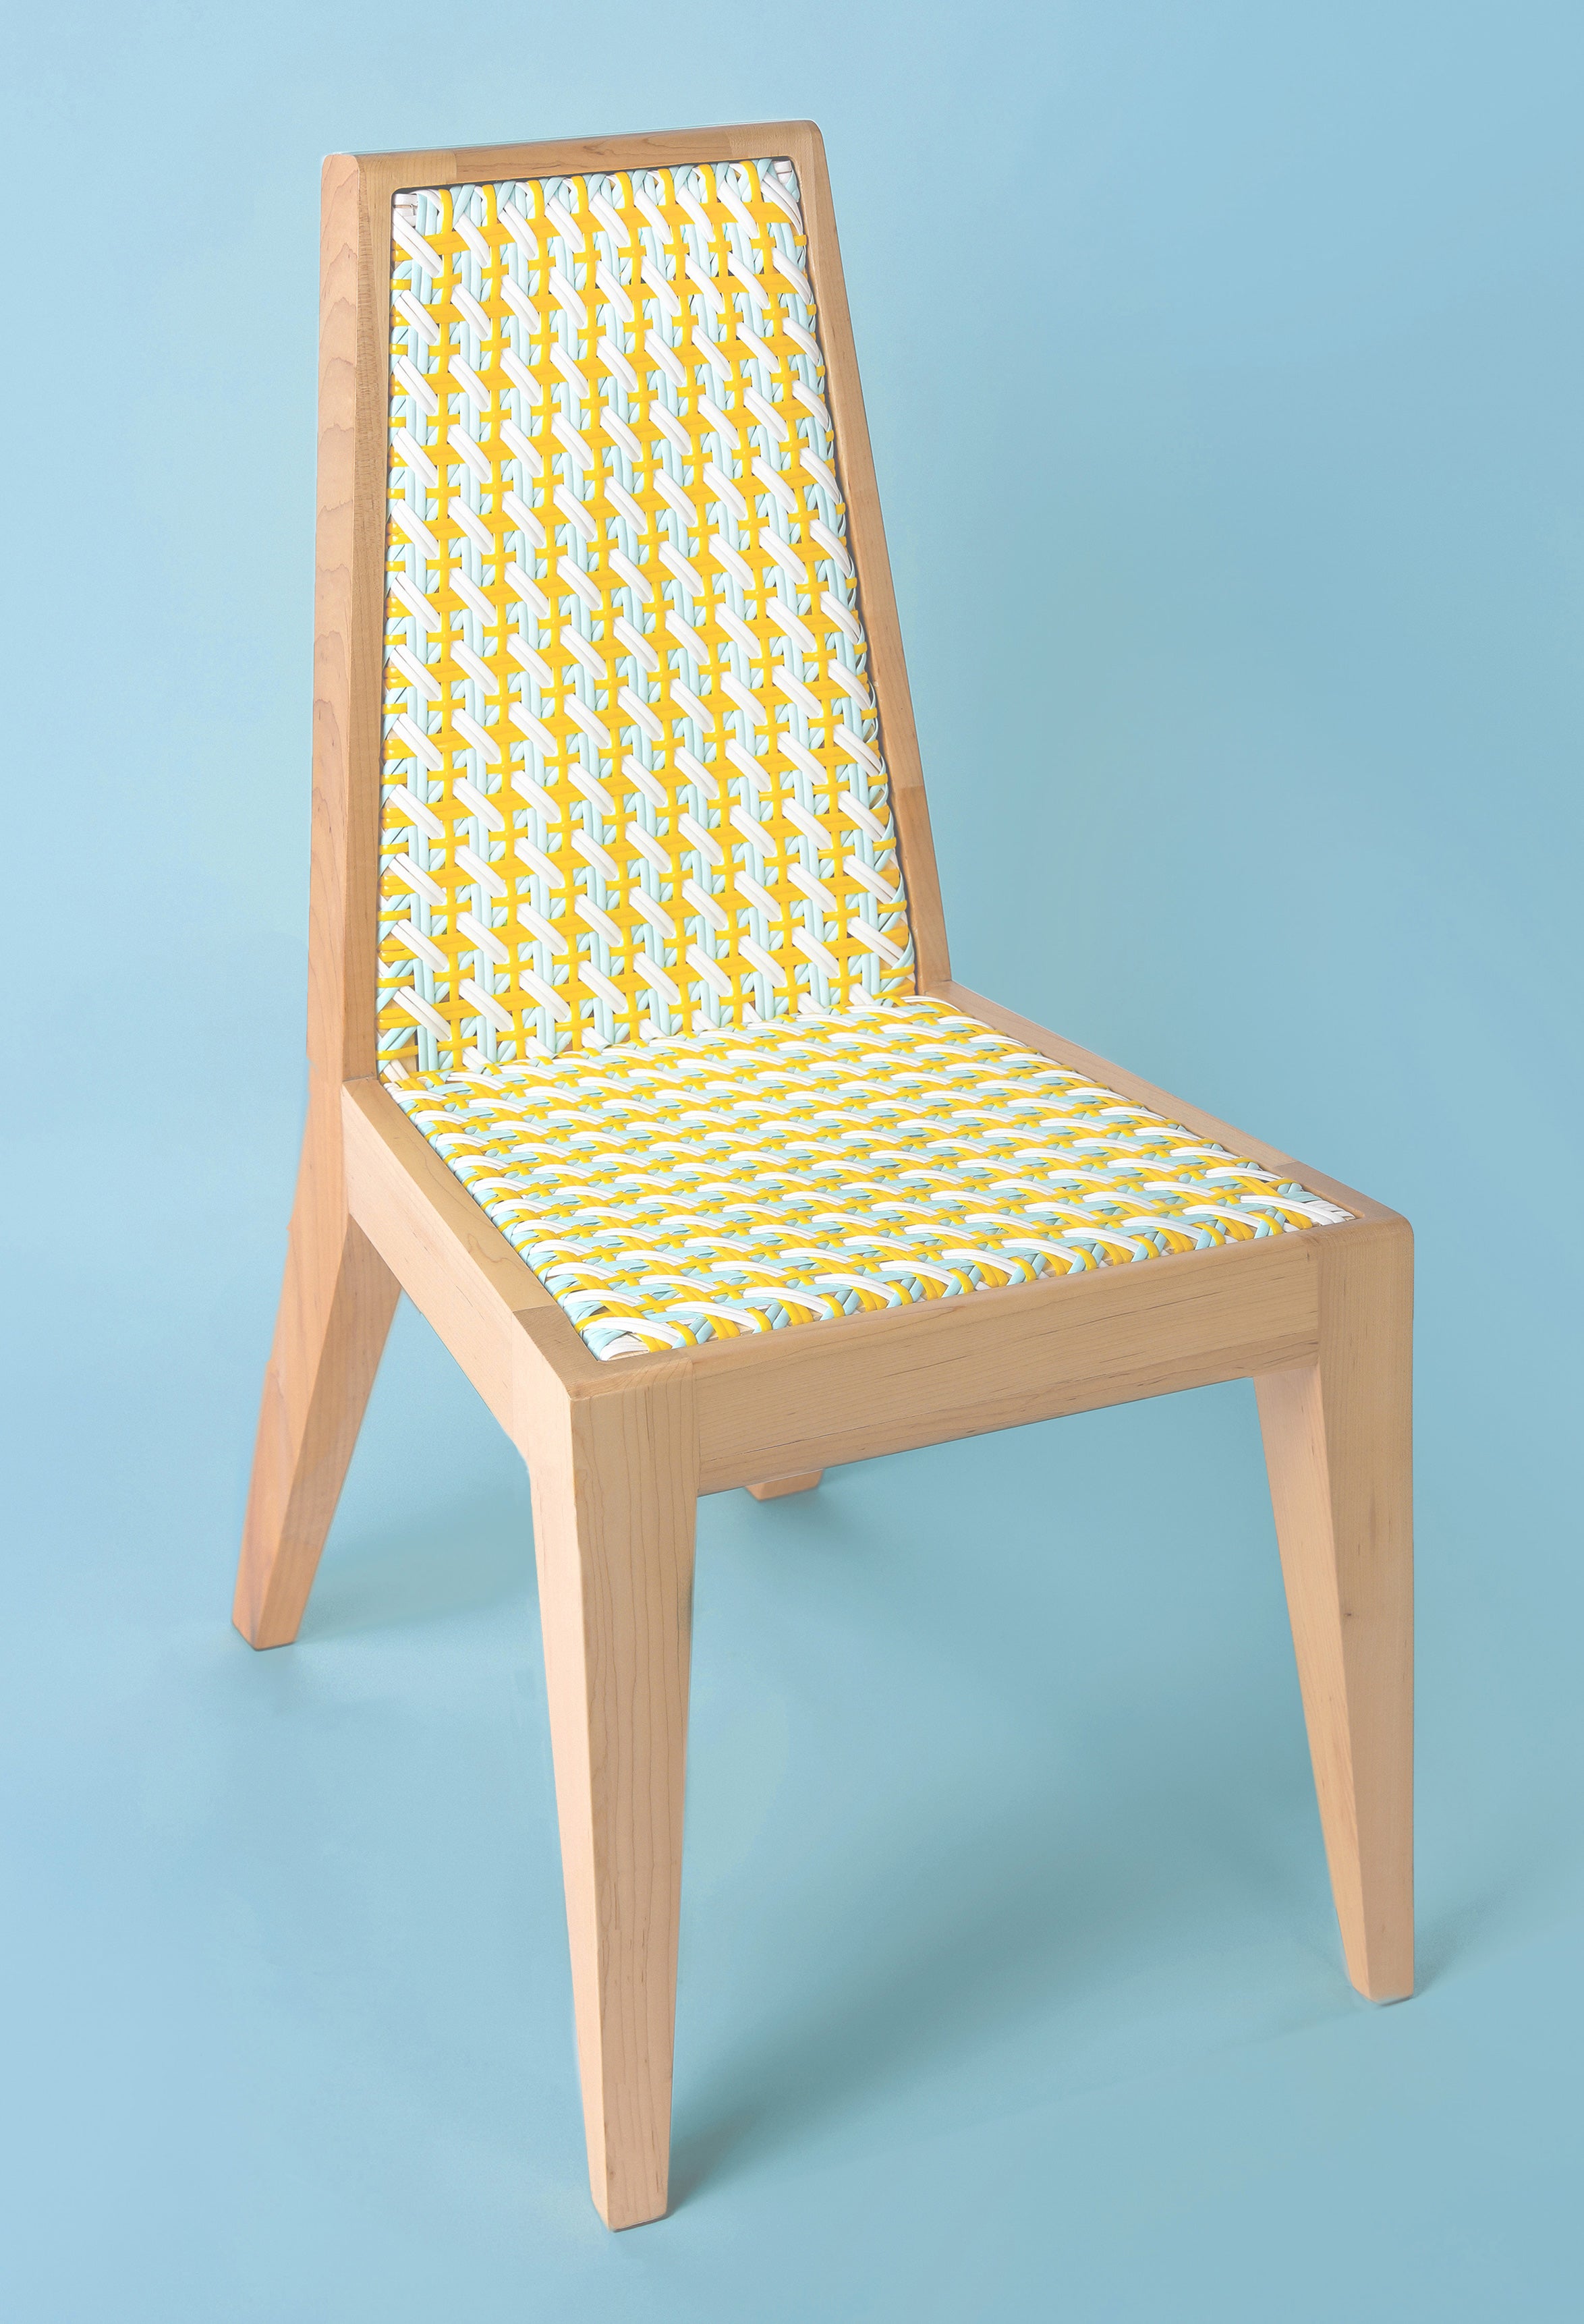 Dina chair form the Beiruti collection of caned timber chairs made in Lebanon designed by Adam Nathaniel Furman